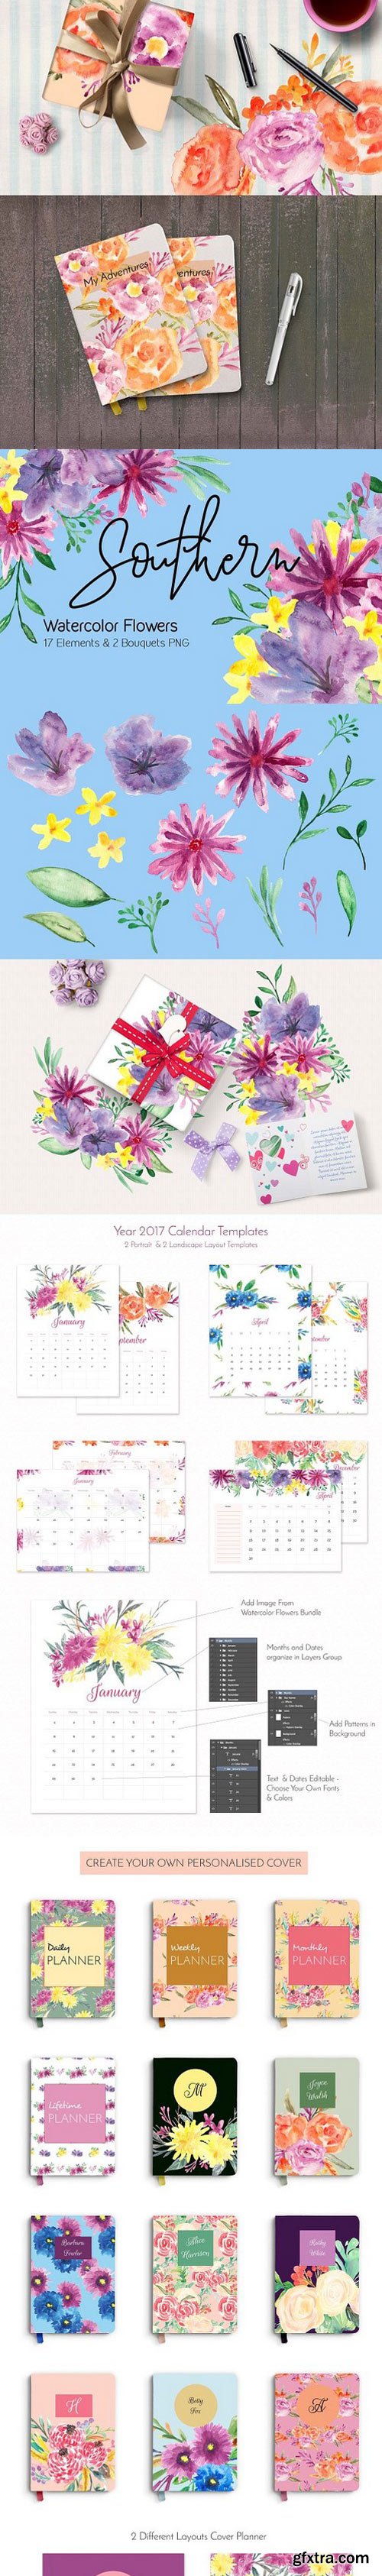 Watercolor Life Time Planner Creator